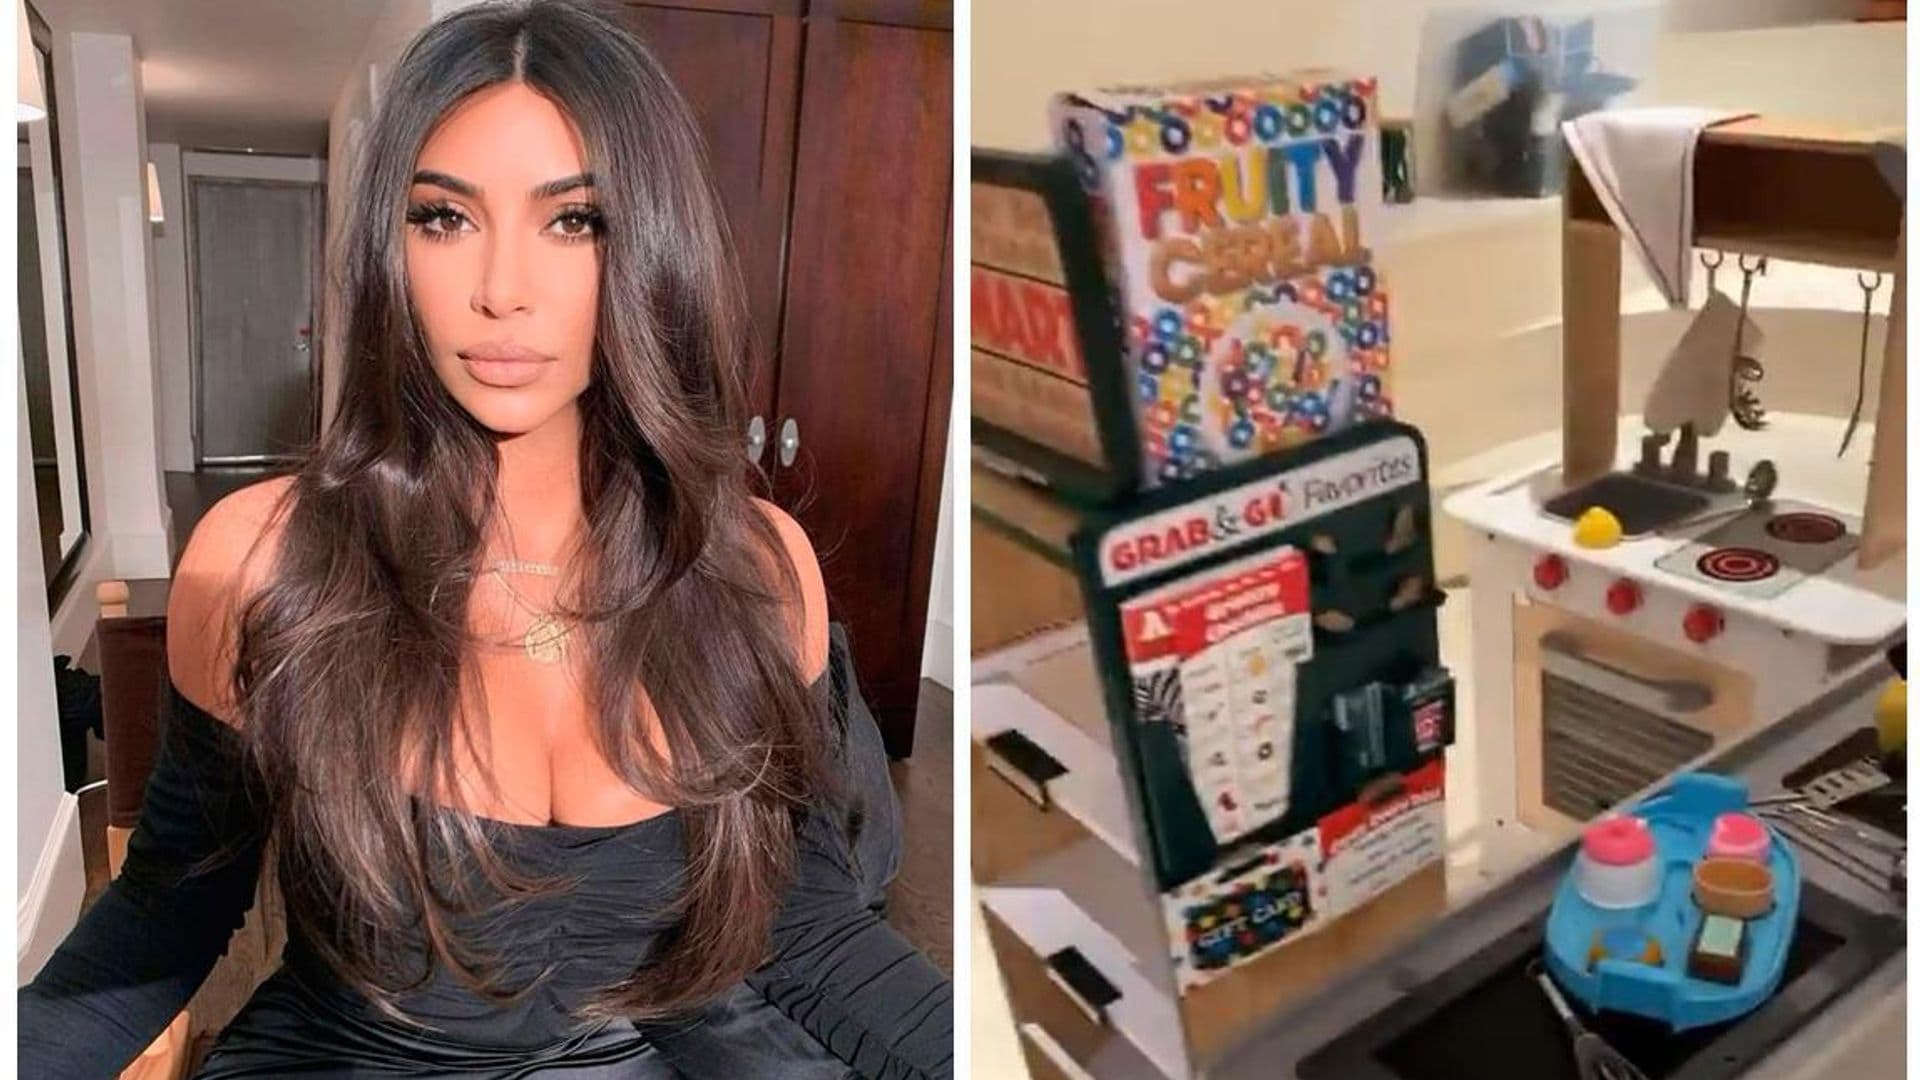 Kim Kardashian shows off her children’s out-of-this-world playroom - complete with concert stage and supermarket